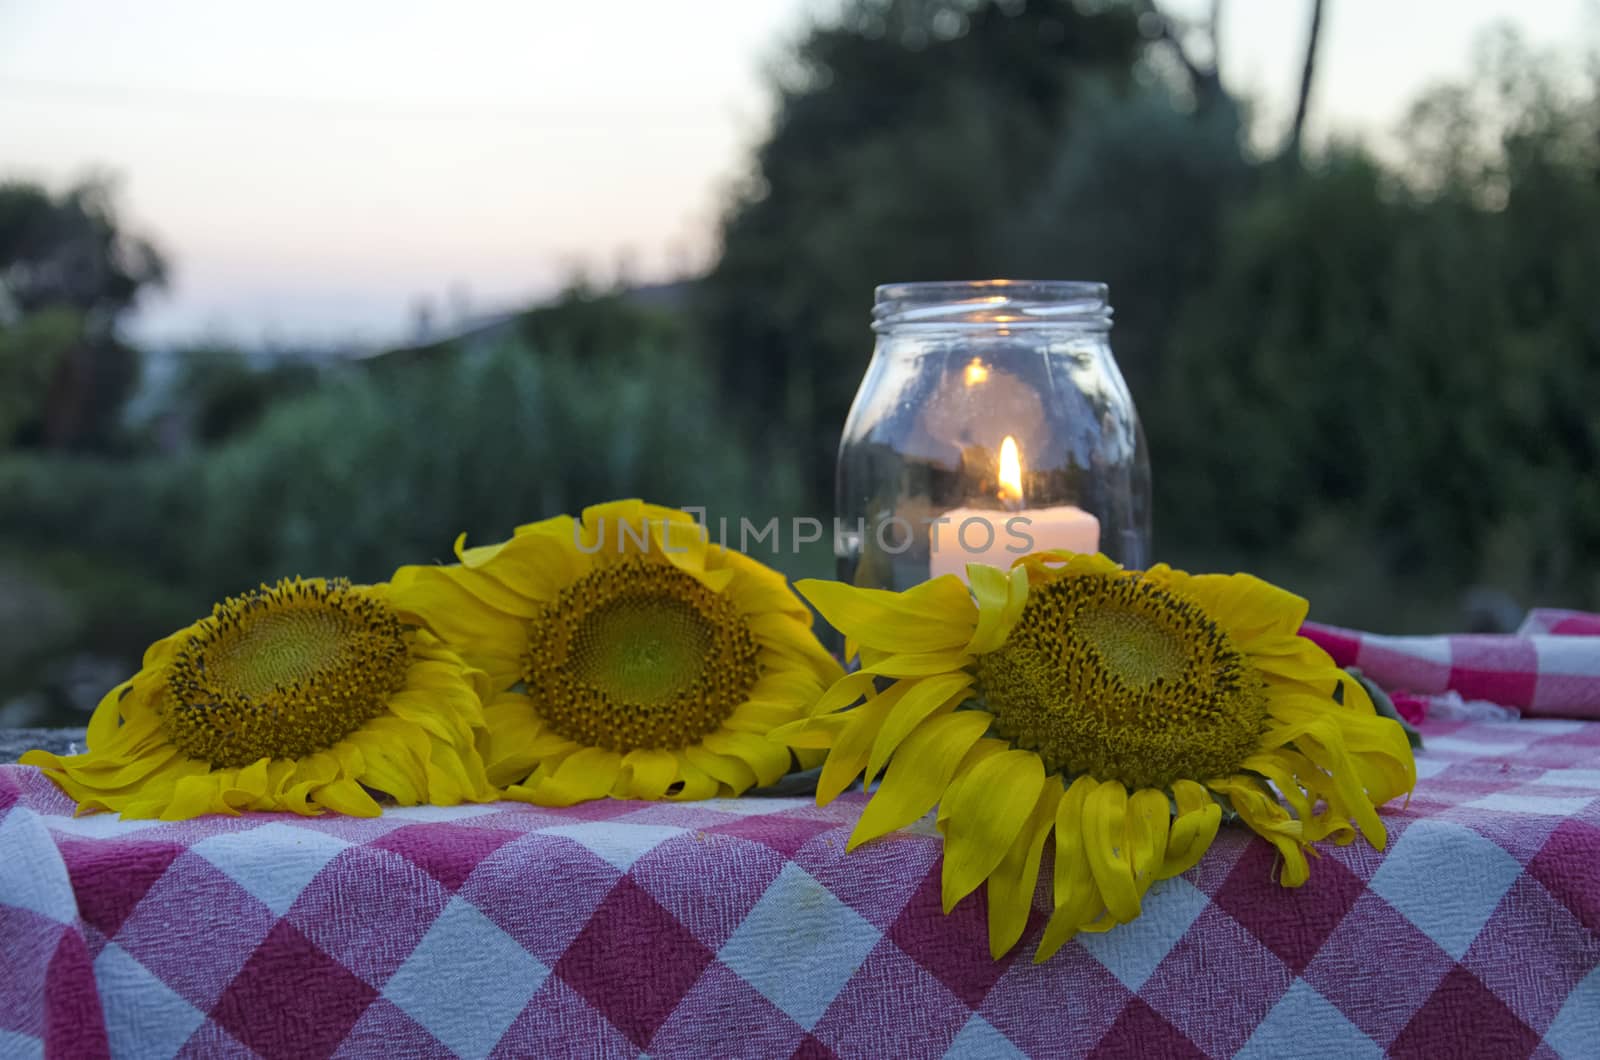 Glass jar and sunflowers by sephirot17